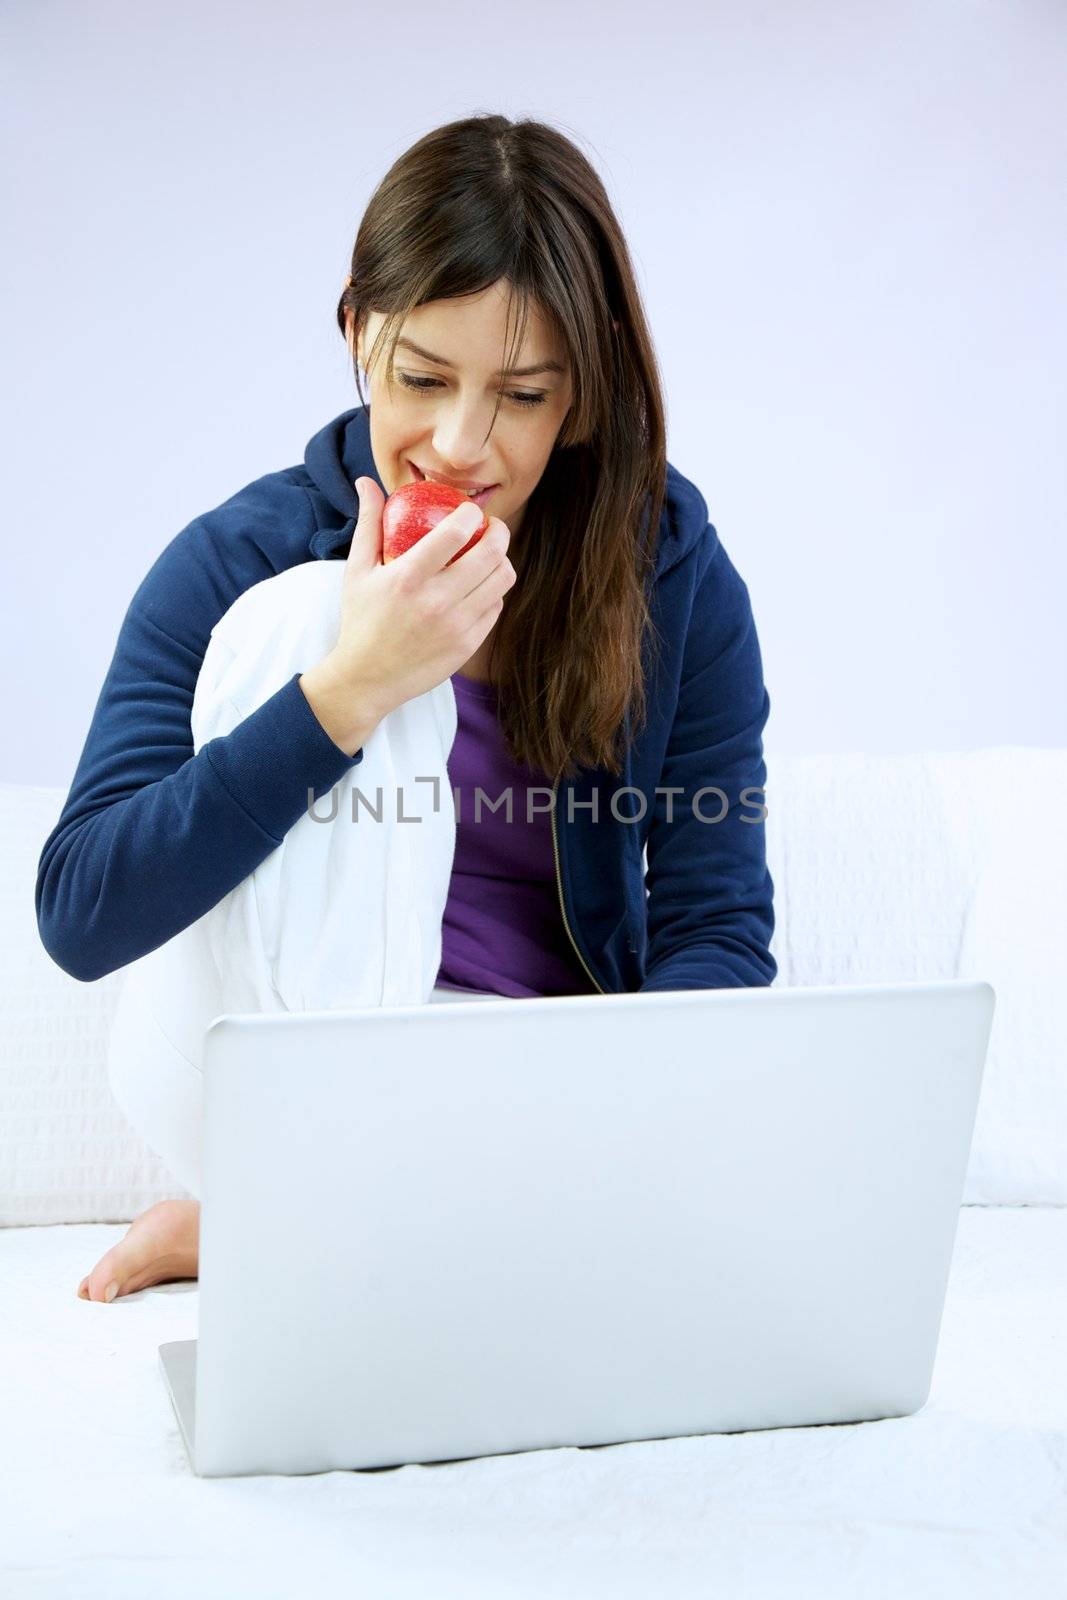 Woman smiling eats apple sitting in front of computer  by fmarsicano